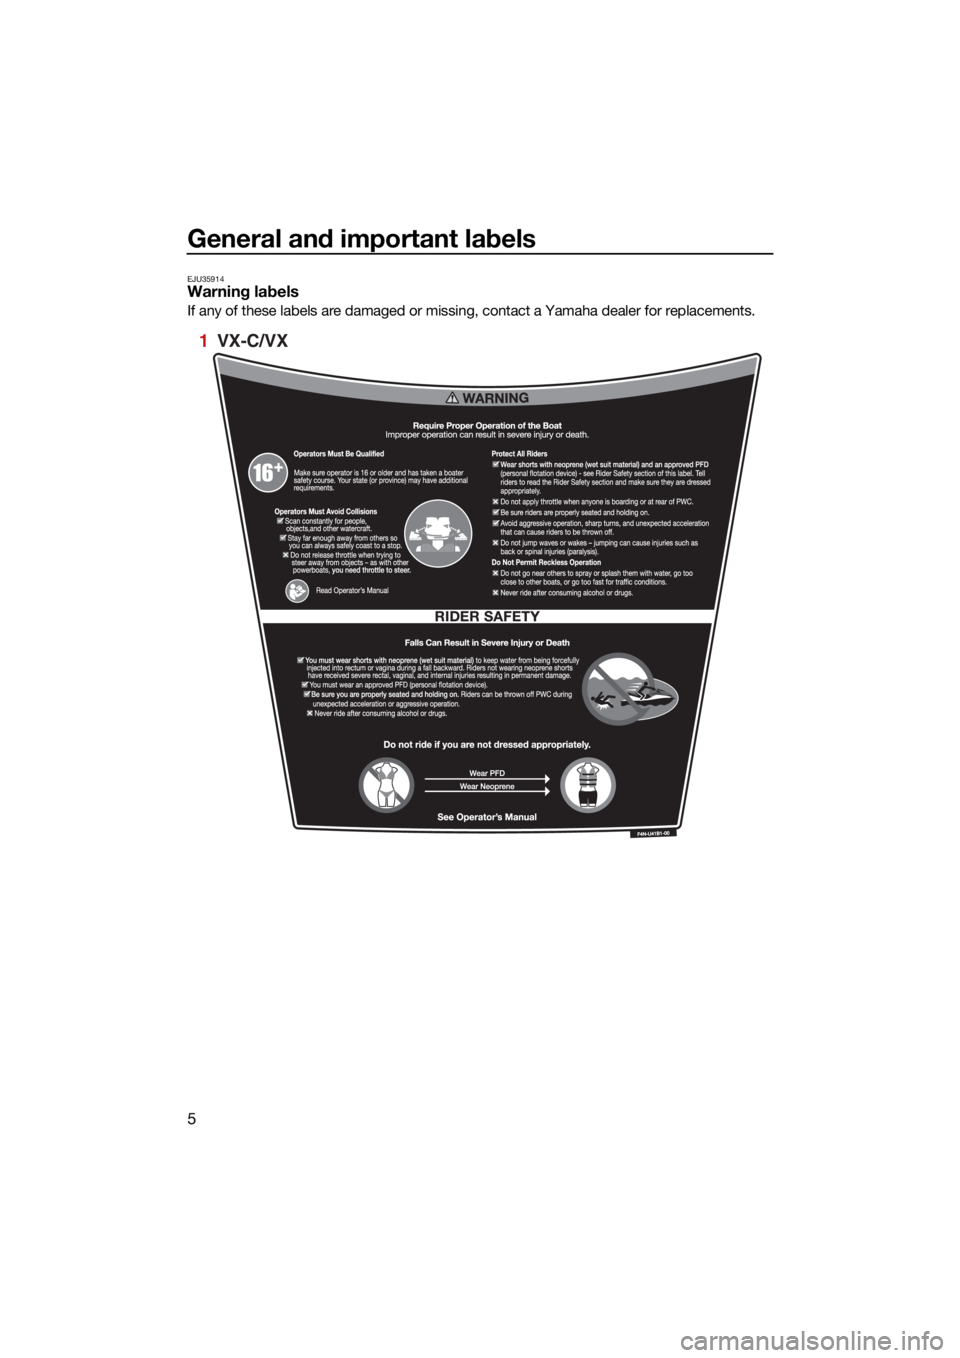 YAMAHA VX DELUXE 2022 User Guide General and important labels
5
EJU35914Warning labels
If any of these labels are damaged or missing, contact a Yamaha dealer for replacements.
1  VX-C/VX
UF4N71E0.book  Page 5  Thursday, August 5, 202